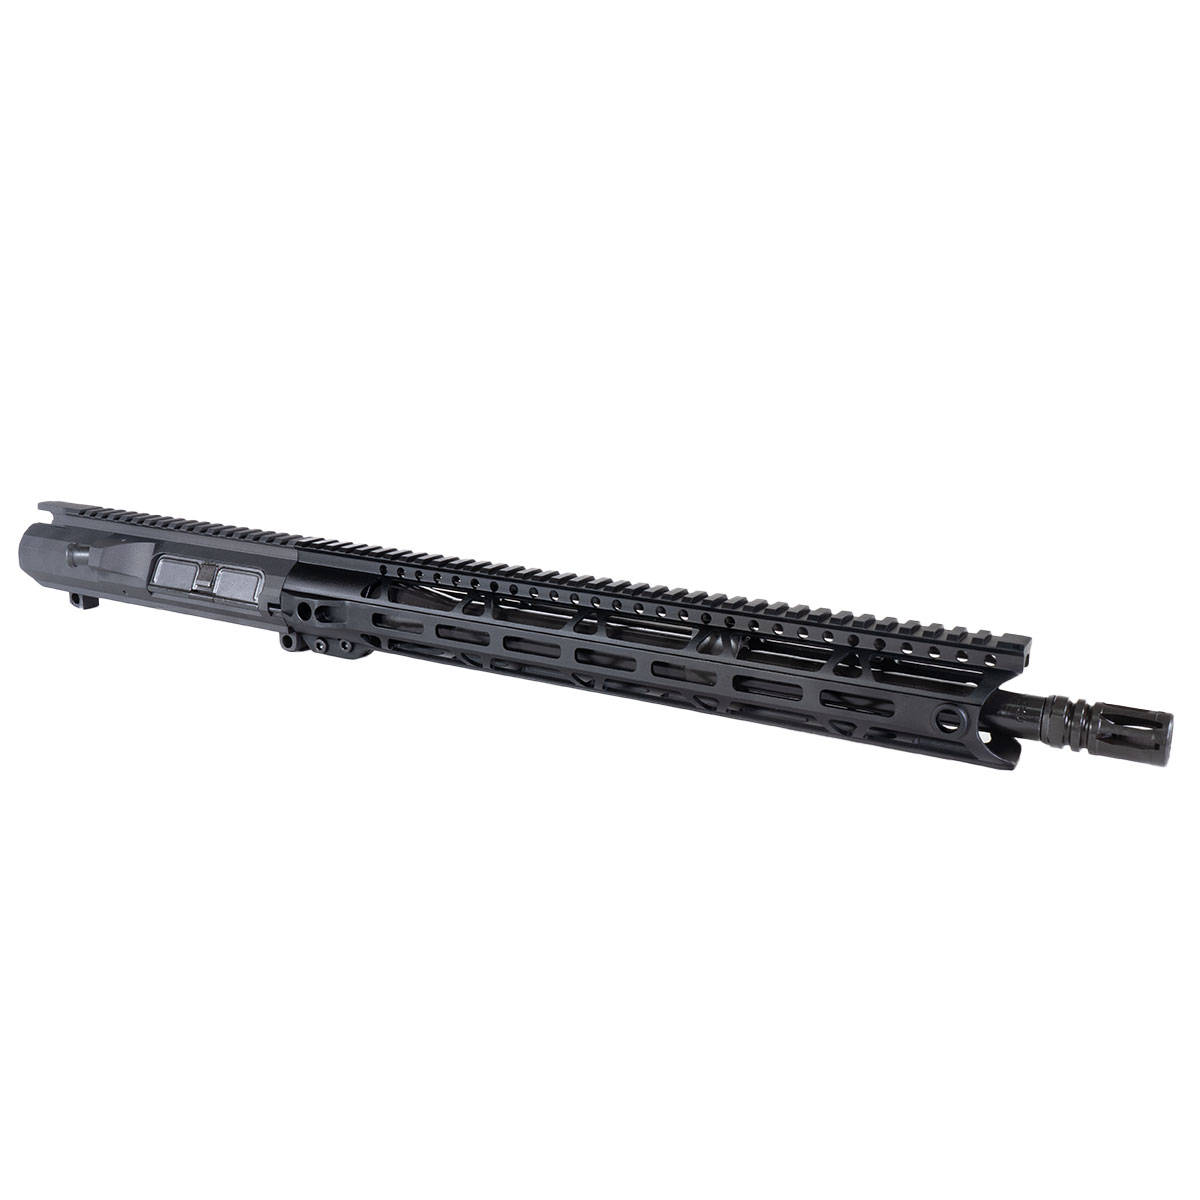 MMC 'Tarnished Expectations' 16-inch LR-308 .308 Win Phosphate Rifle Upper Build Kit